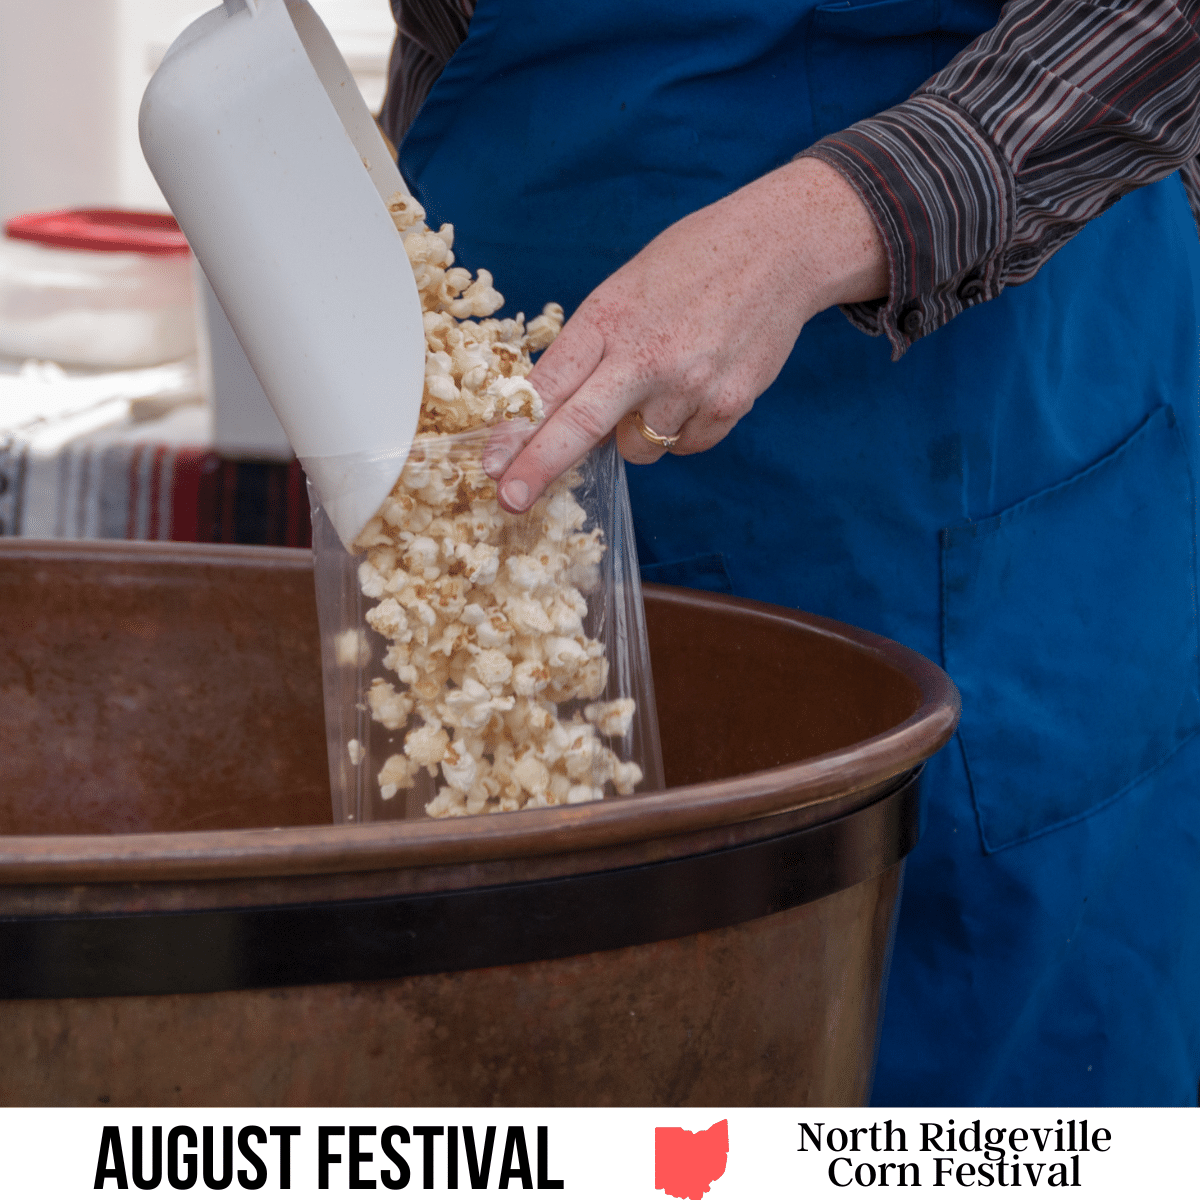 A square image of an up-close photo of a person pouring kettle corn into a clear plastic bag with a white, plastic scoop. A white strip across the bottom has text August Festival North Ridgeville Corn Festival.